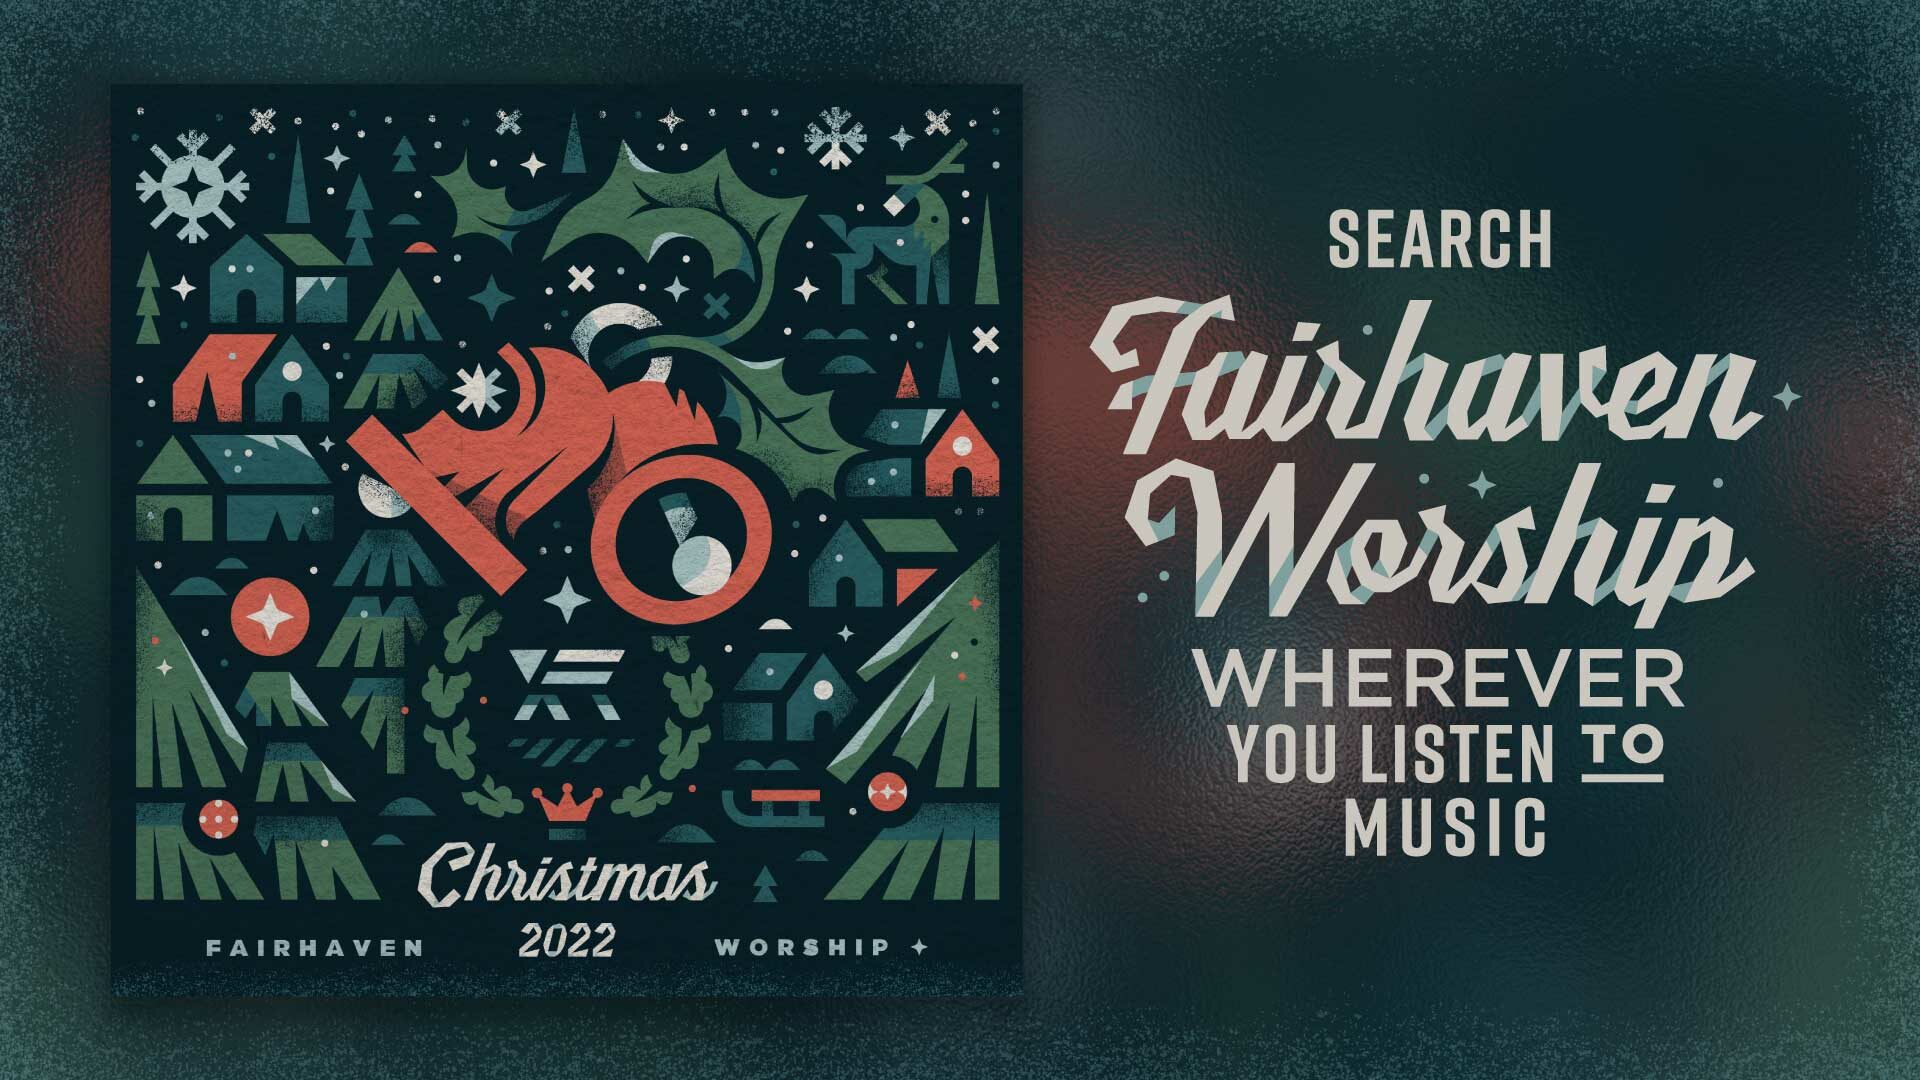 A gift of music for your holiday season